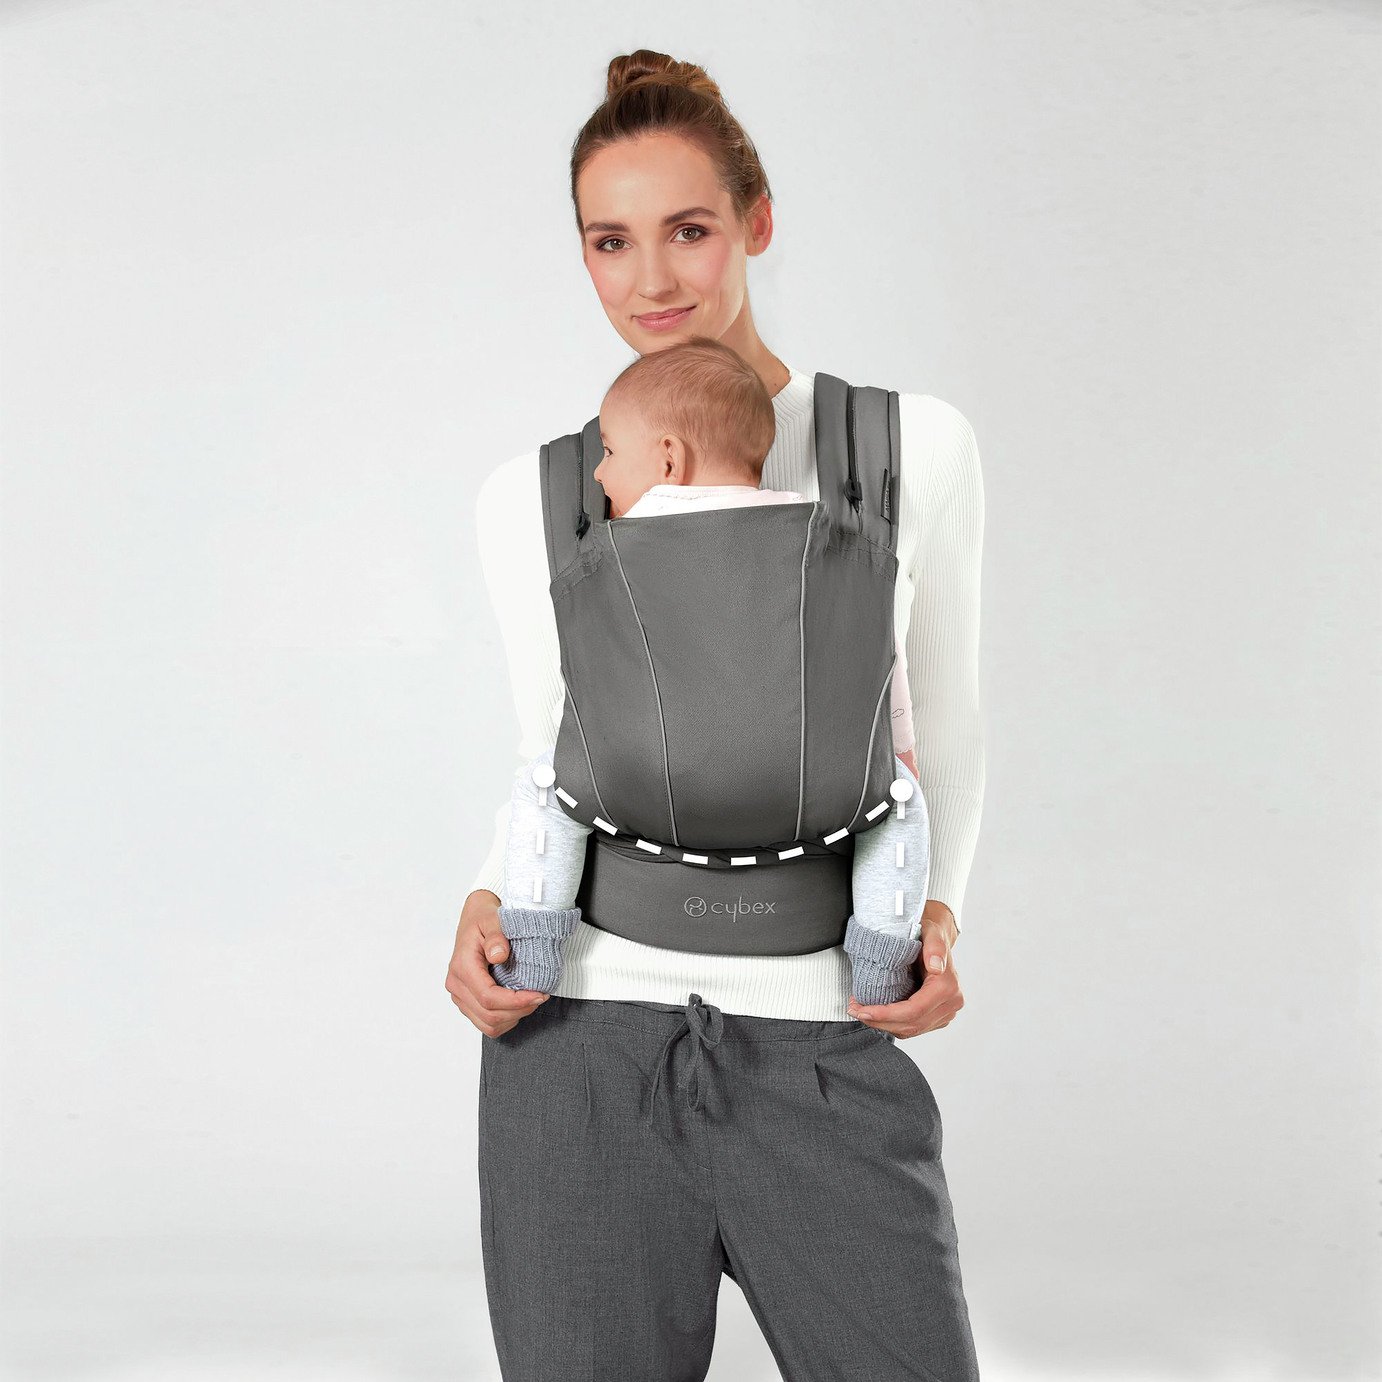 Cybex Maria Tie Baby Carrier Review